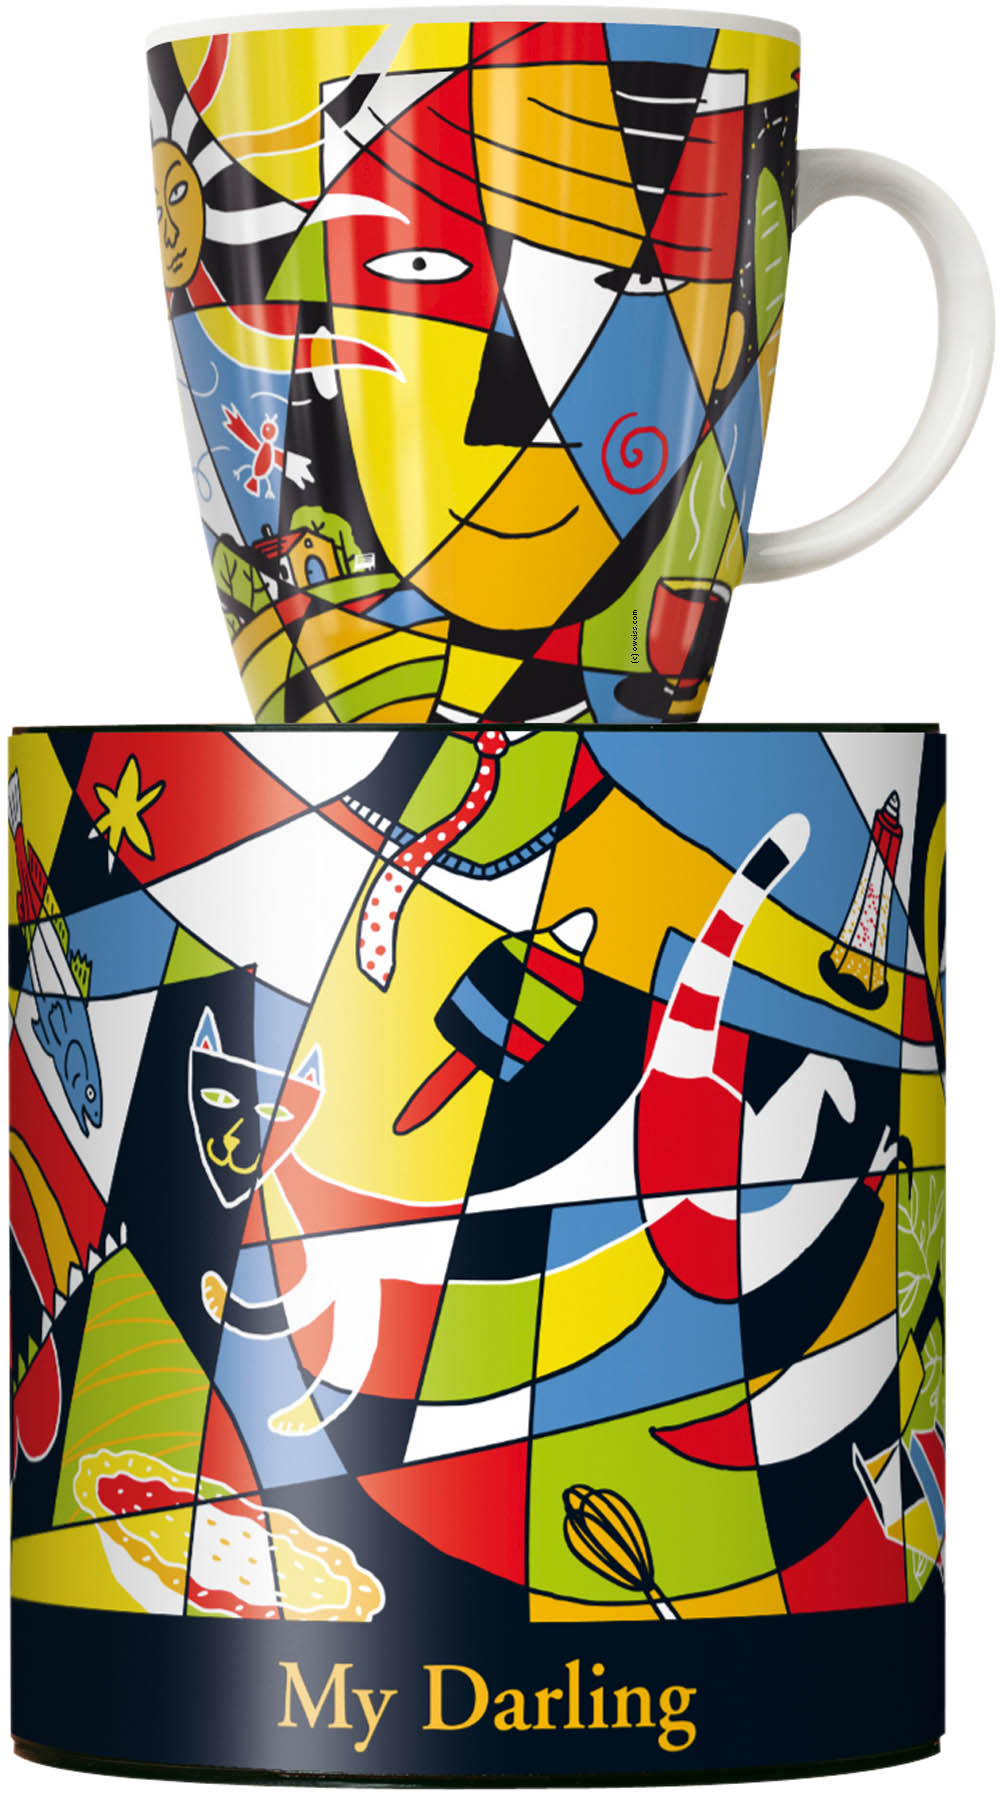 Boy girl faces colors coffee cup mug presents gifts darling Ritzenhoff